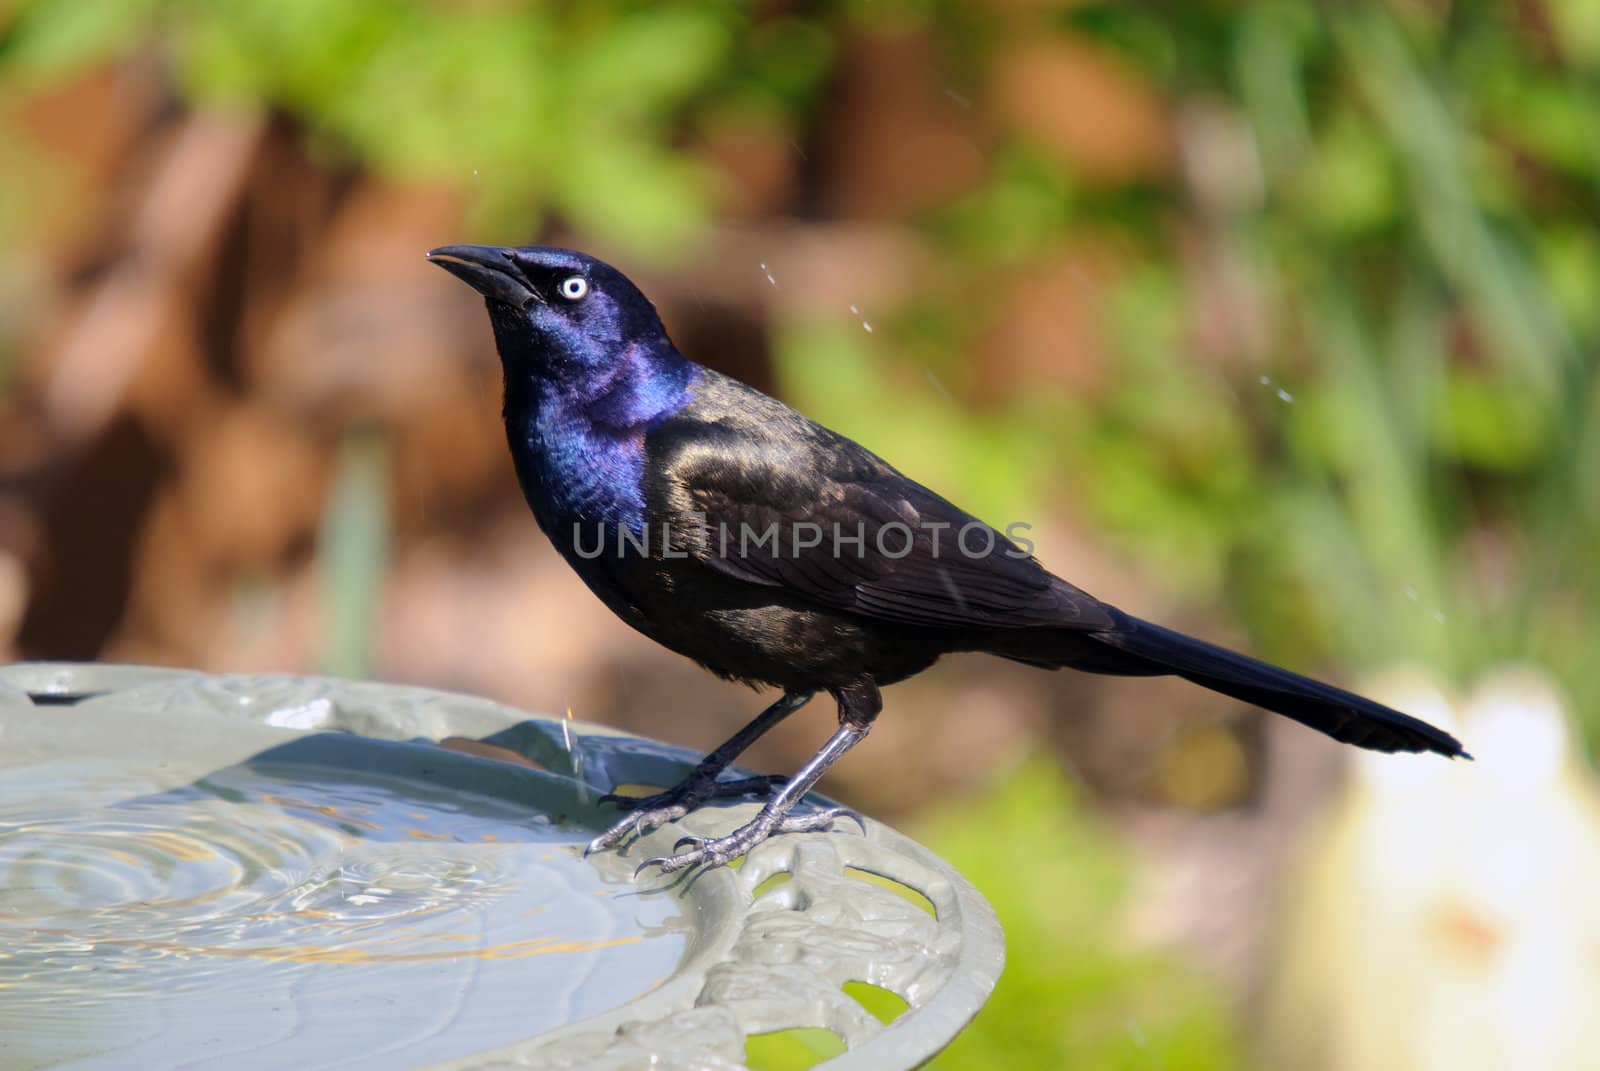 Common Grackle on the side of a bird bath